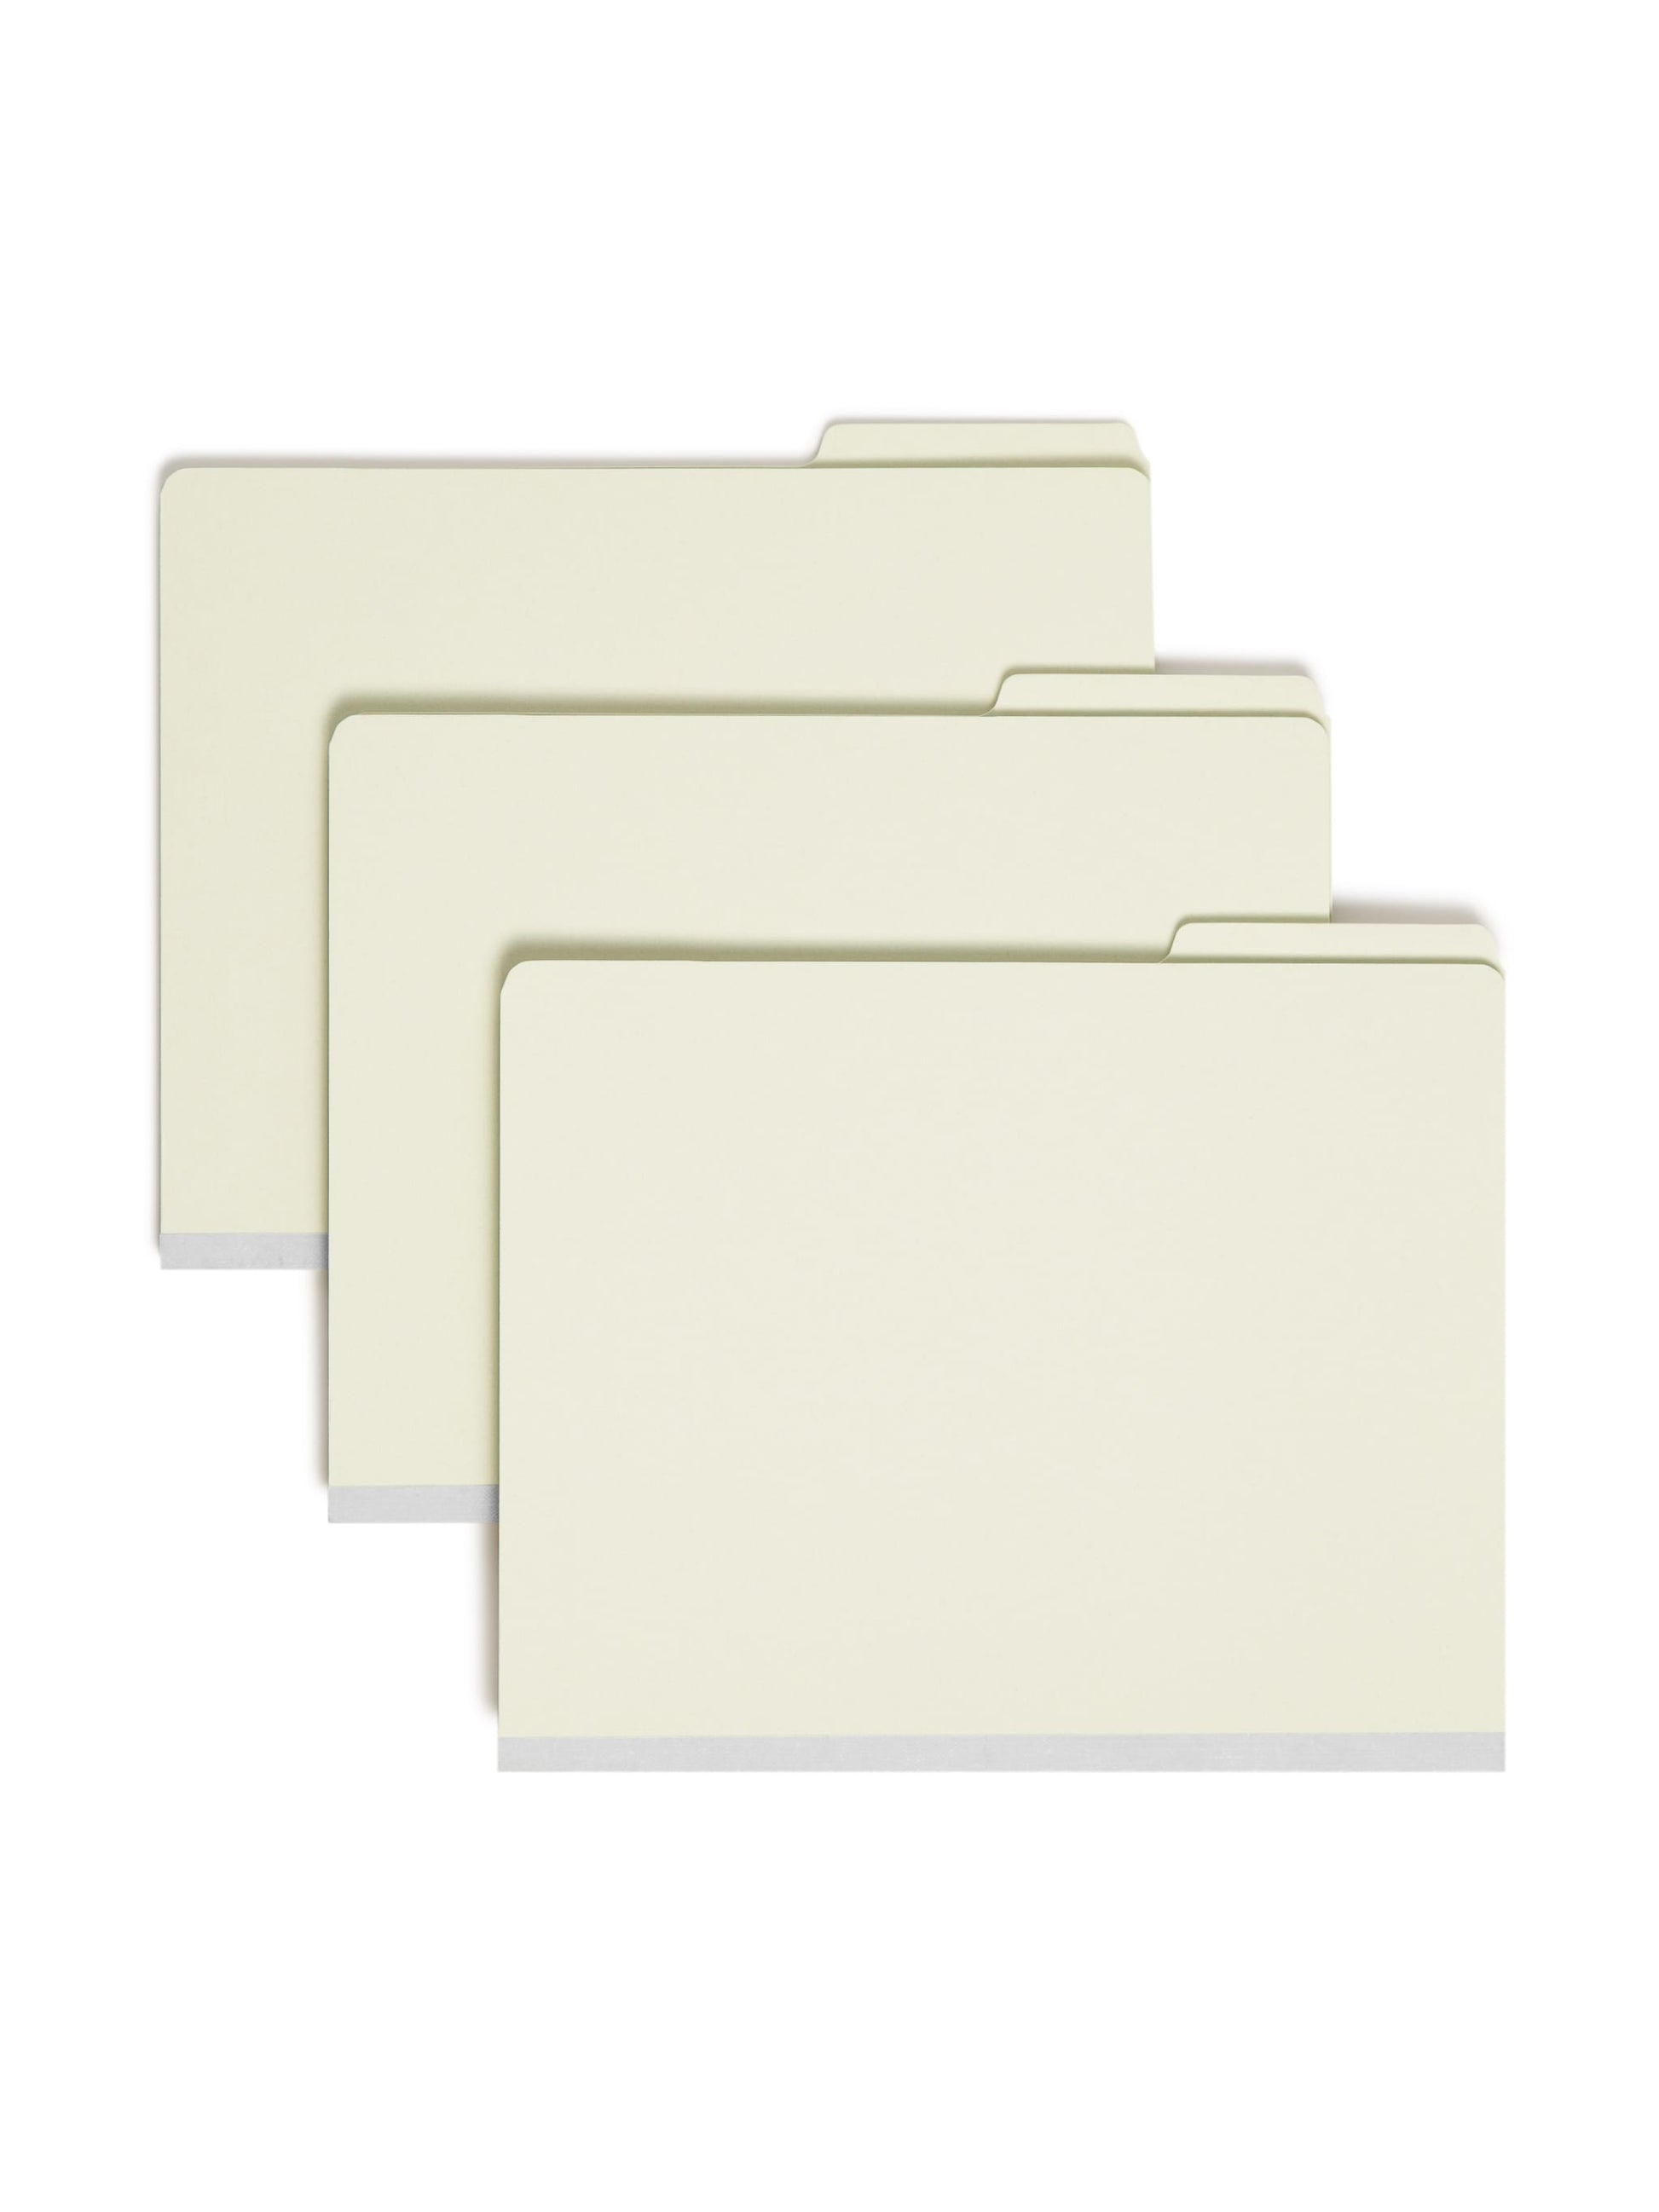 SafeSHIELD® Pressboard Classification File Folders, 2 Dividers, 2 inch Expansion, 1/3-Cut Tab, Gray/Green Color, Letter Size, Set of 0, 30086486142152